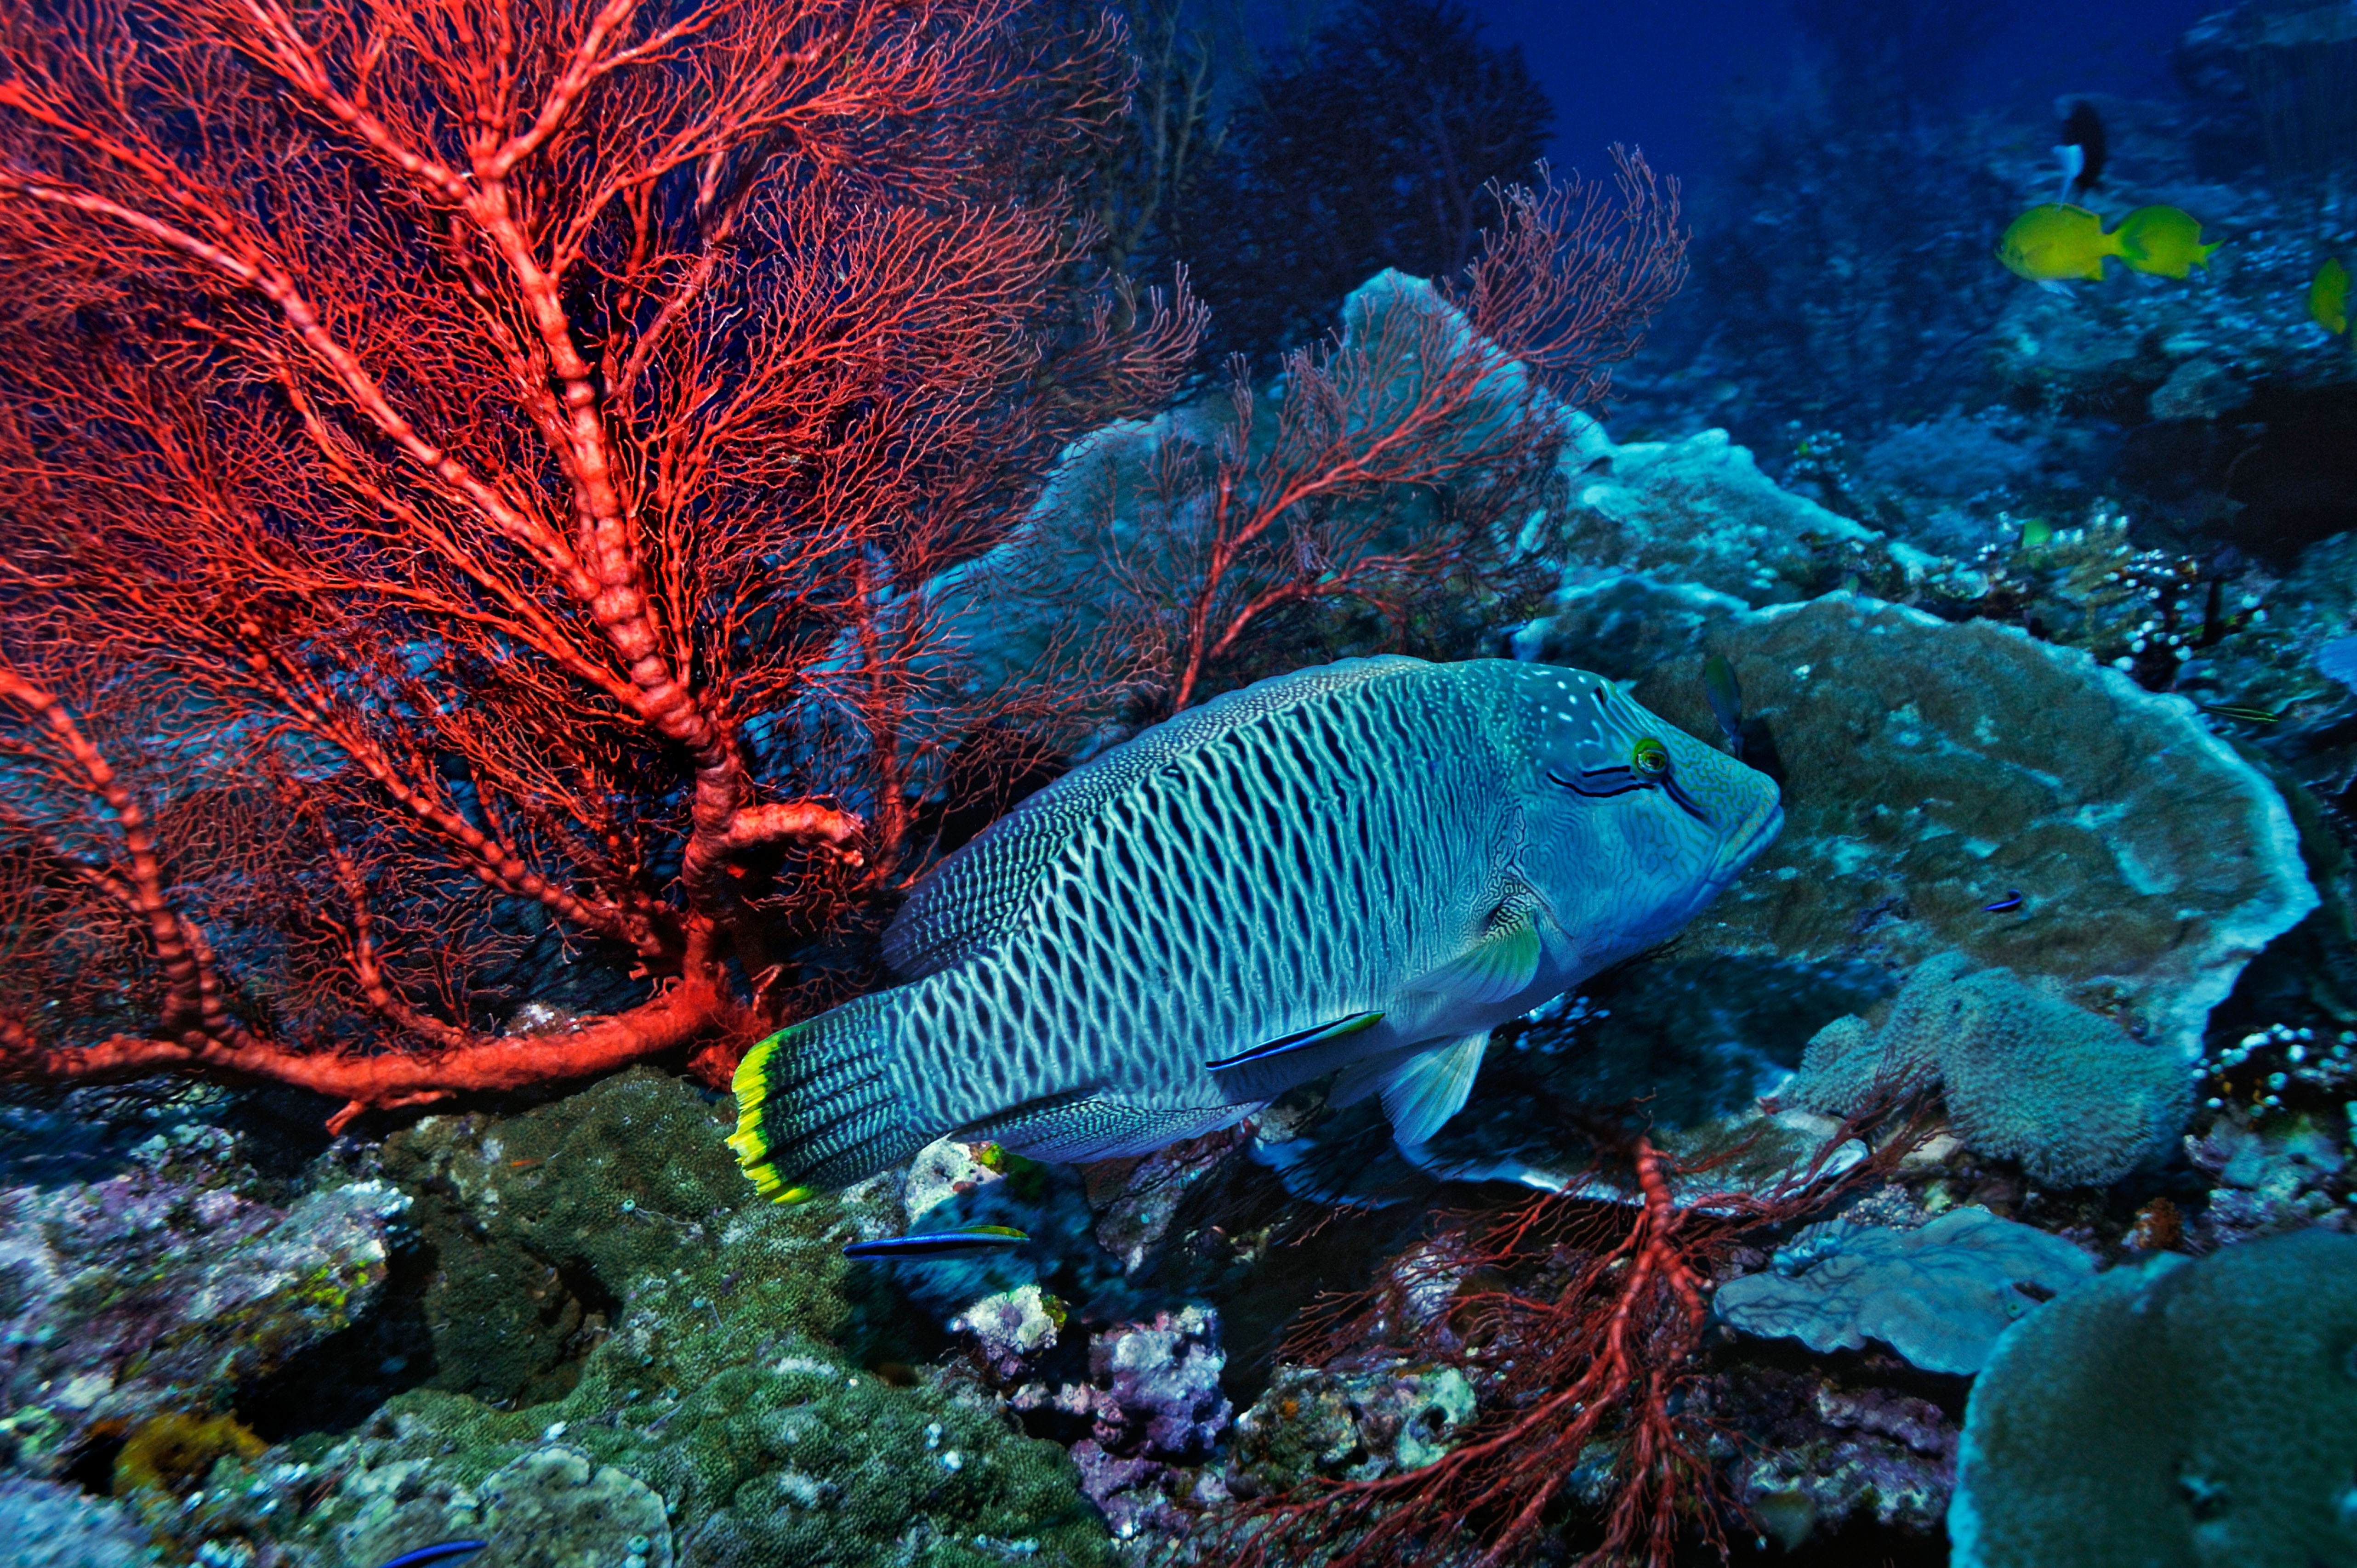 The Humphead wrasse: one of the world's most endangered coral reef